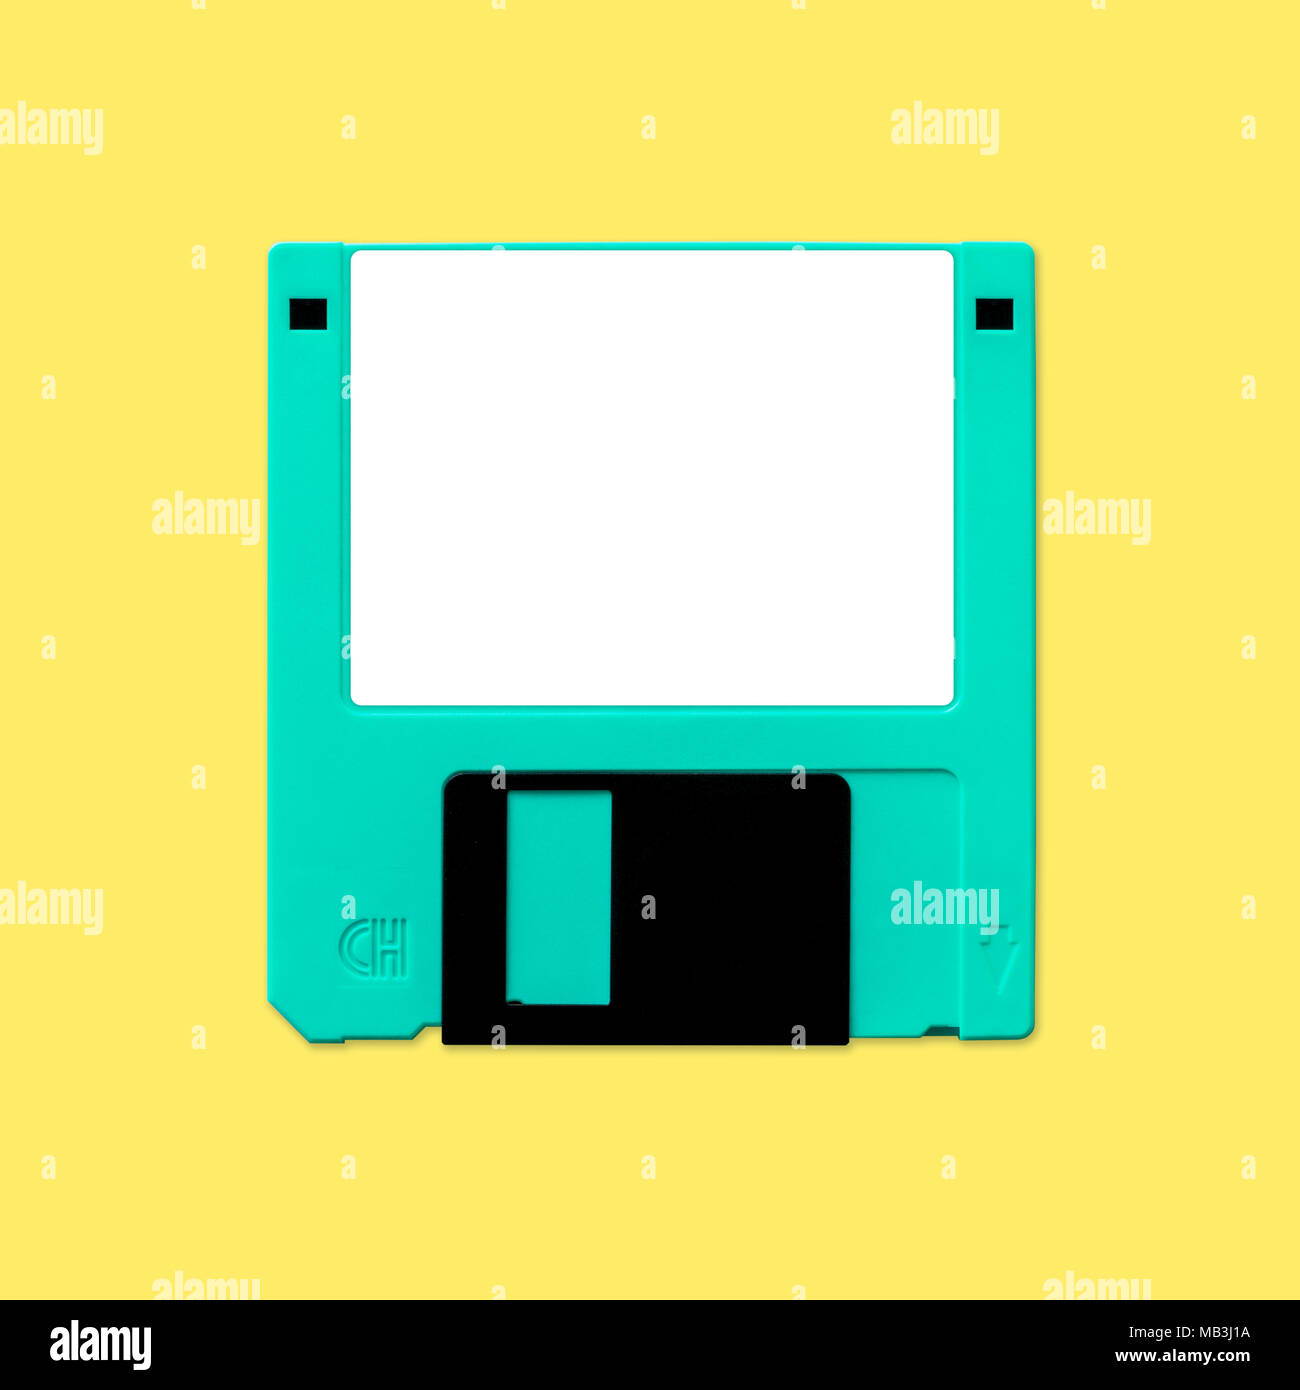 Obsolete 3.5 inch computer diskette, isolated and presented in punchy pastel colors with a blank white customizable label. Theme of early digital stor Stock Photo